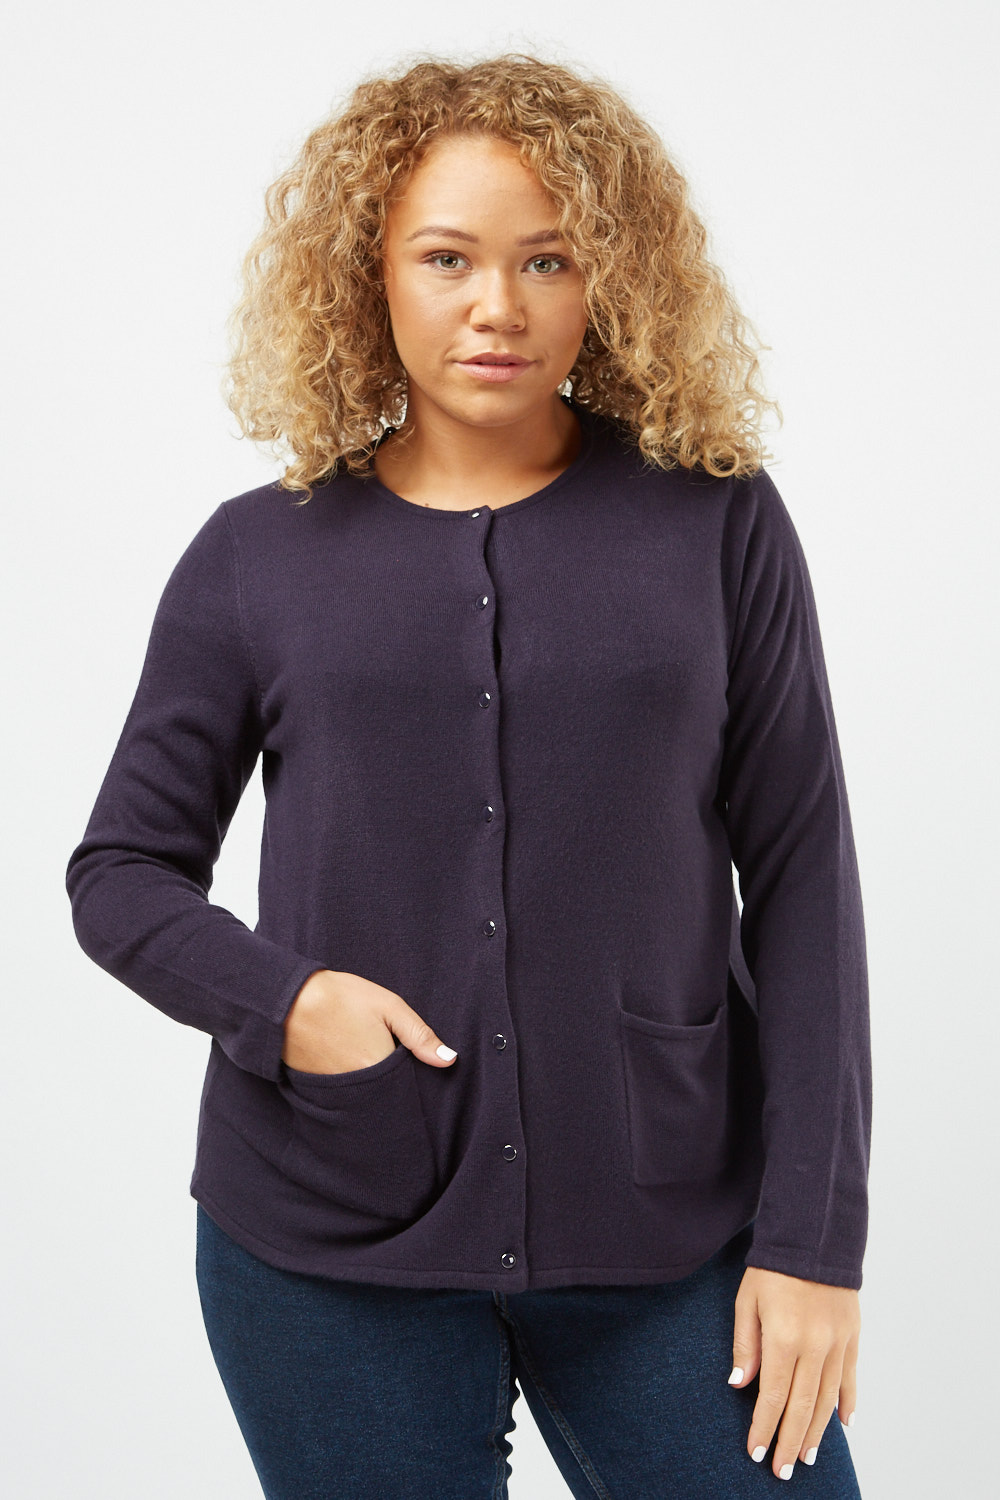 Crew Neck Knitted Cardigan - Just $3